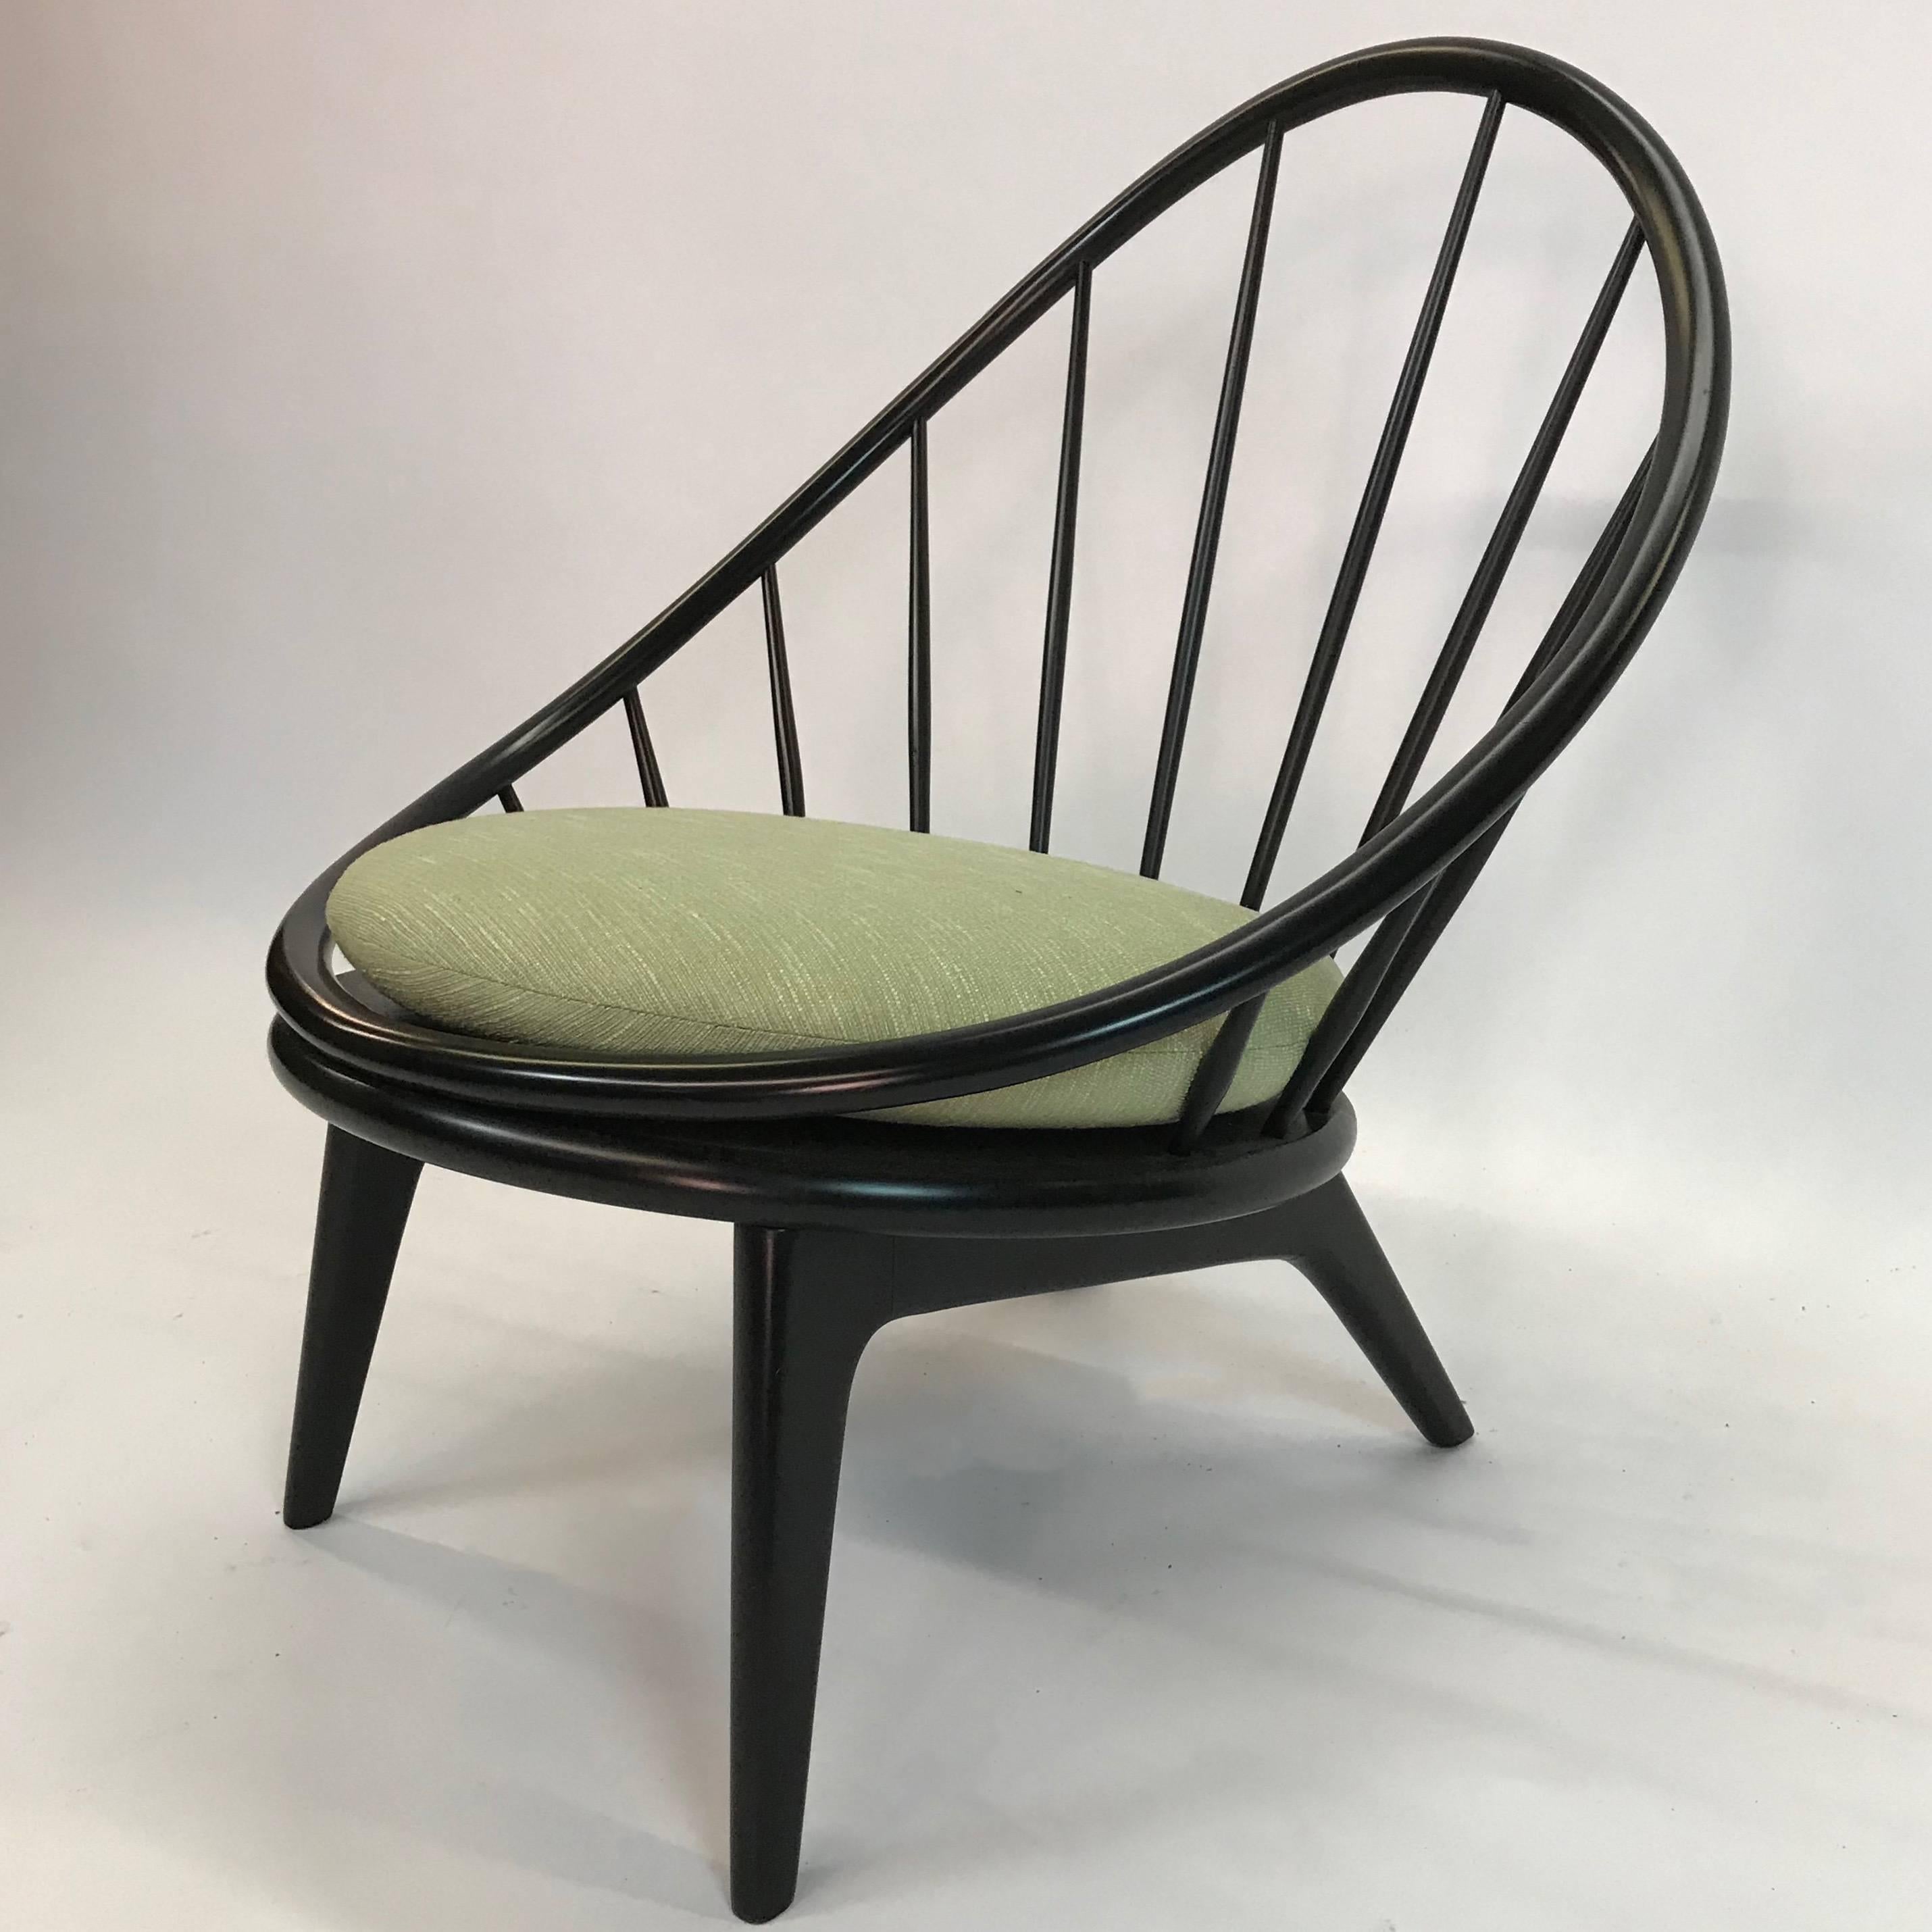 Early, Ib Kofod-Larsen peacock or hoop lounge chair features a rounded, ebonized walnut frame with spindle back. The newly upholstered chenille seat cushion is 20 inches diameter.